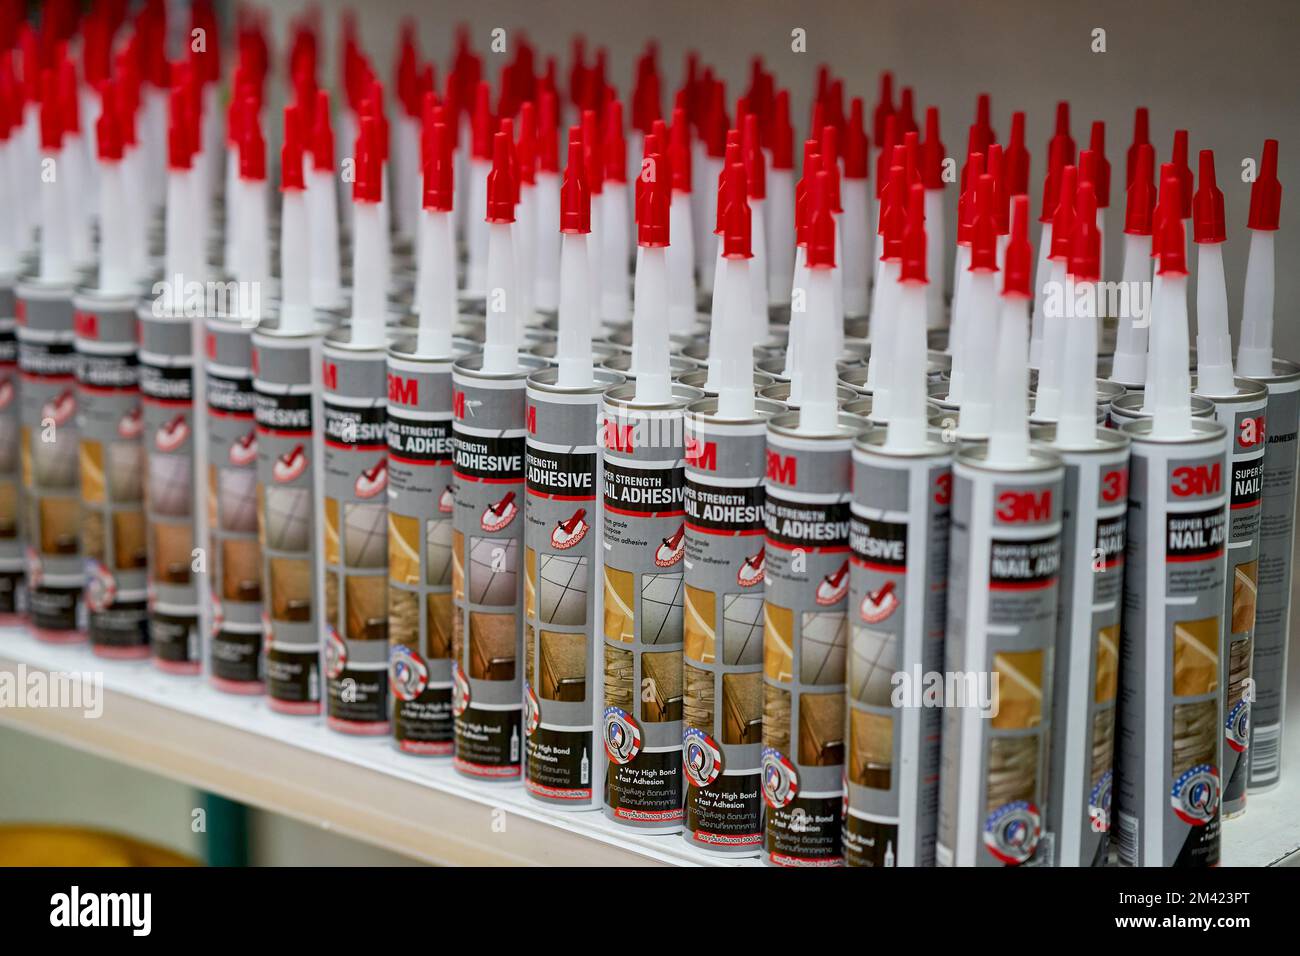 Tubes of grout sealer in a hardware store. Stock Photo